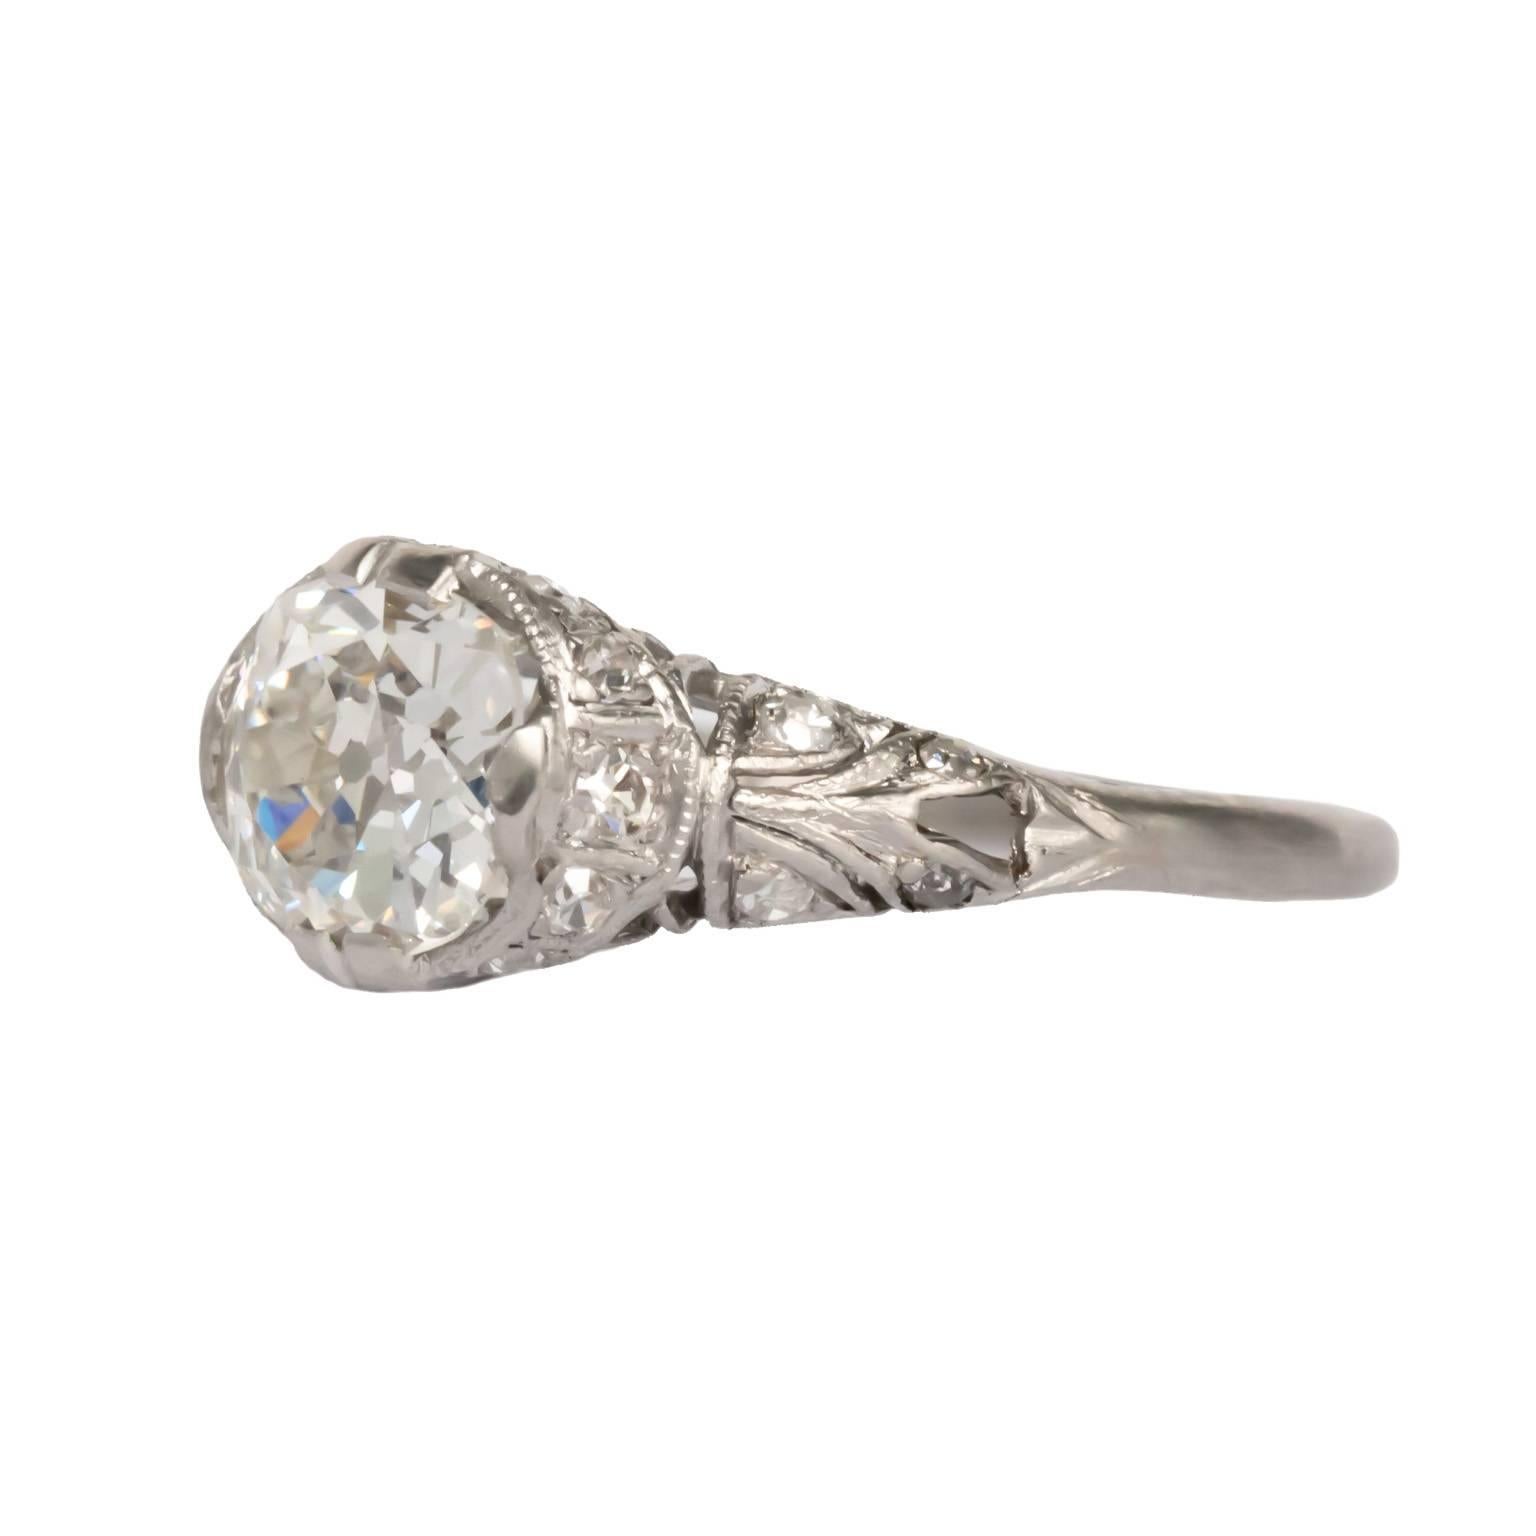 Item Details: 
Ring Size: 5
Metal Type: Platinum
Weight: 2.4 grams

Center Diamond Details
GIA CERTIFIED Center Diamond - Certificate # 6183881754
Shape: Cushion Brilliant
Carat Weight: 1.16 carat
Color: I
Clarity: VS1

Side Stone Details: 
Shape: